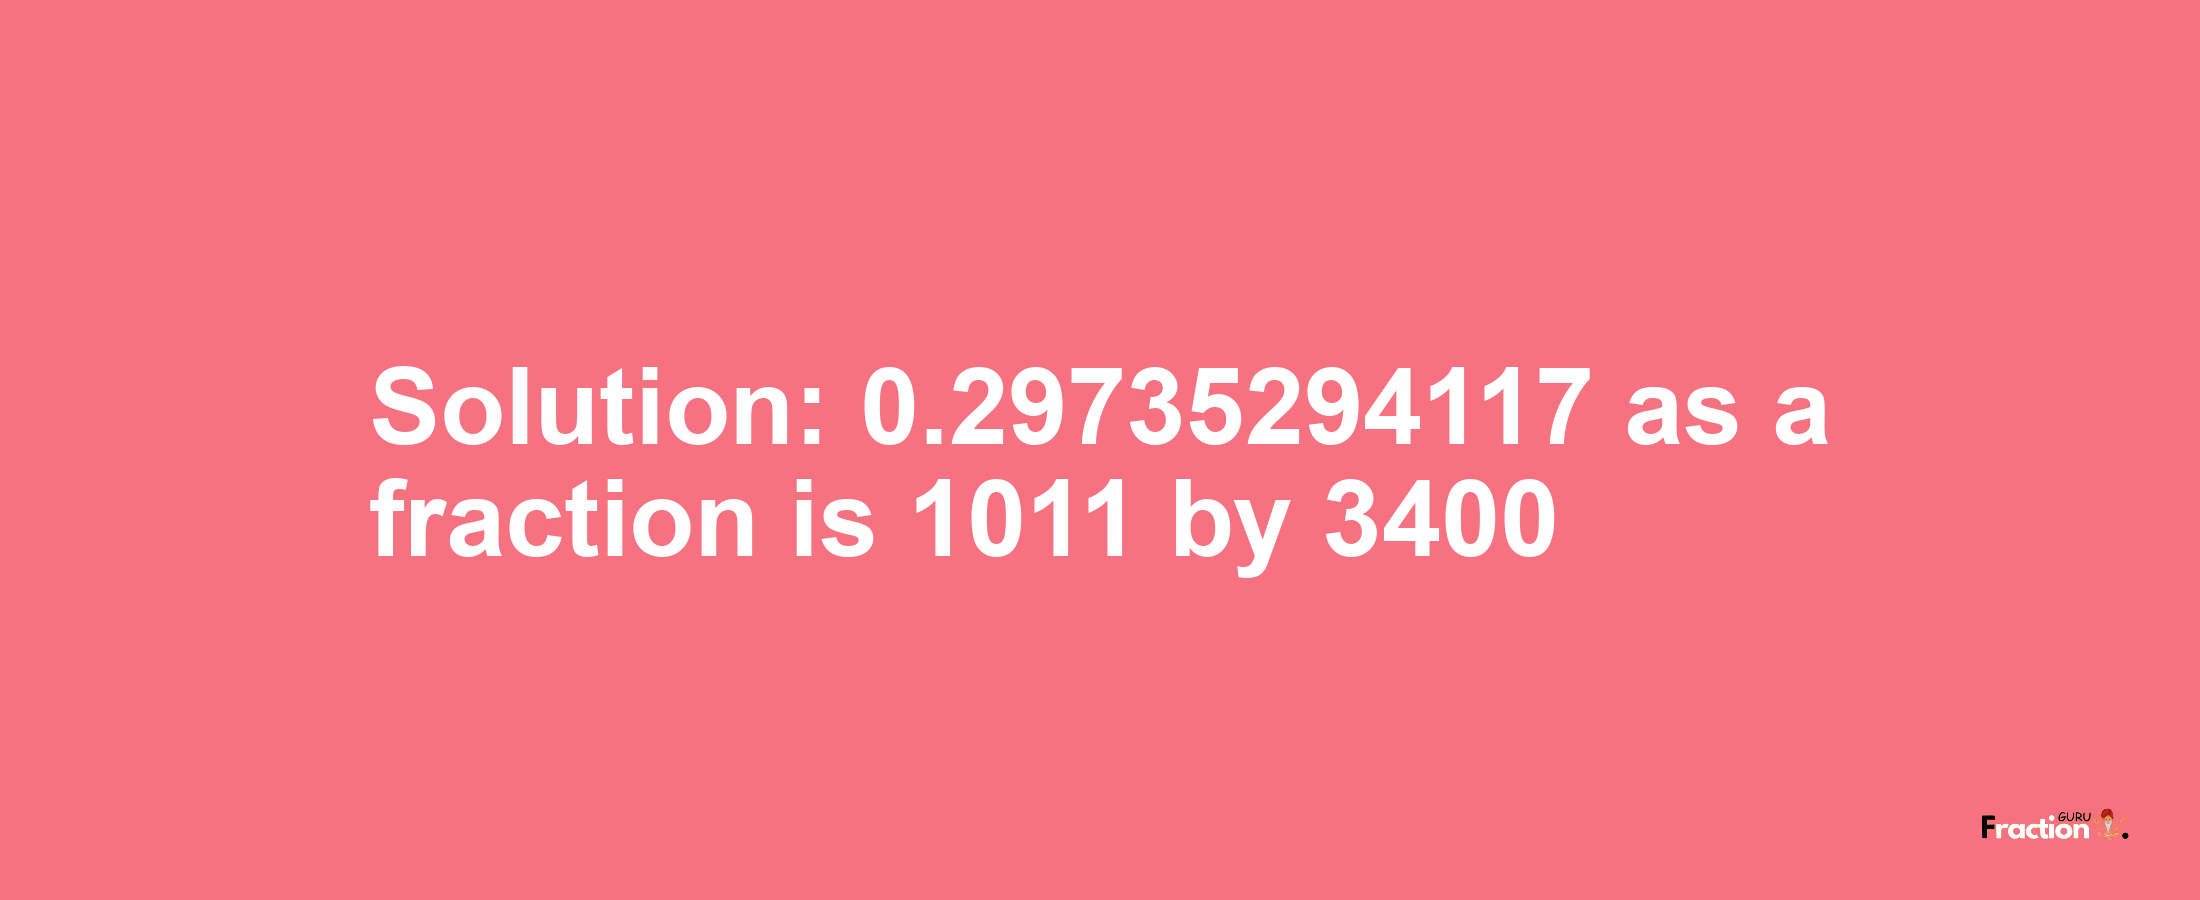 Solution:0.29735294117 as a fraction is 1011/3400